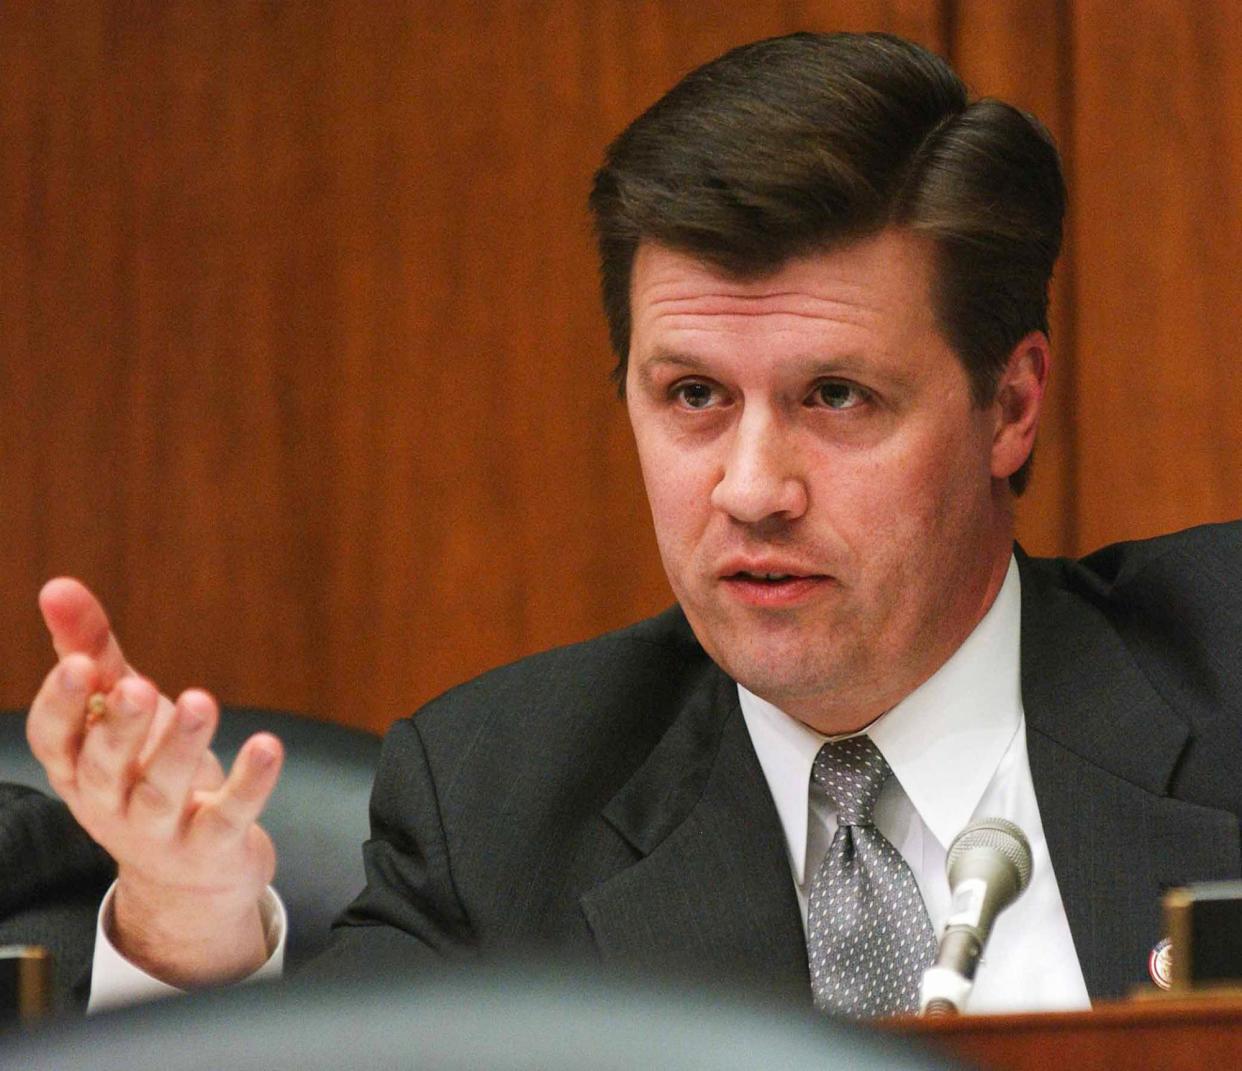 <span>John Hostettler during a House hearing on Capitol Hill, in Washington DC in 2003.</span><span>Photograph: Scott J Ferrell/CQ-Roll Call via Getty Images</span>